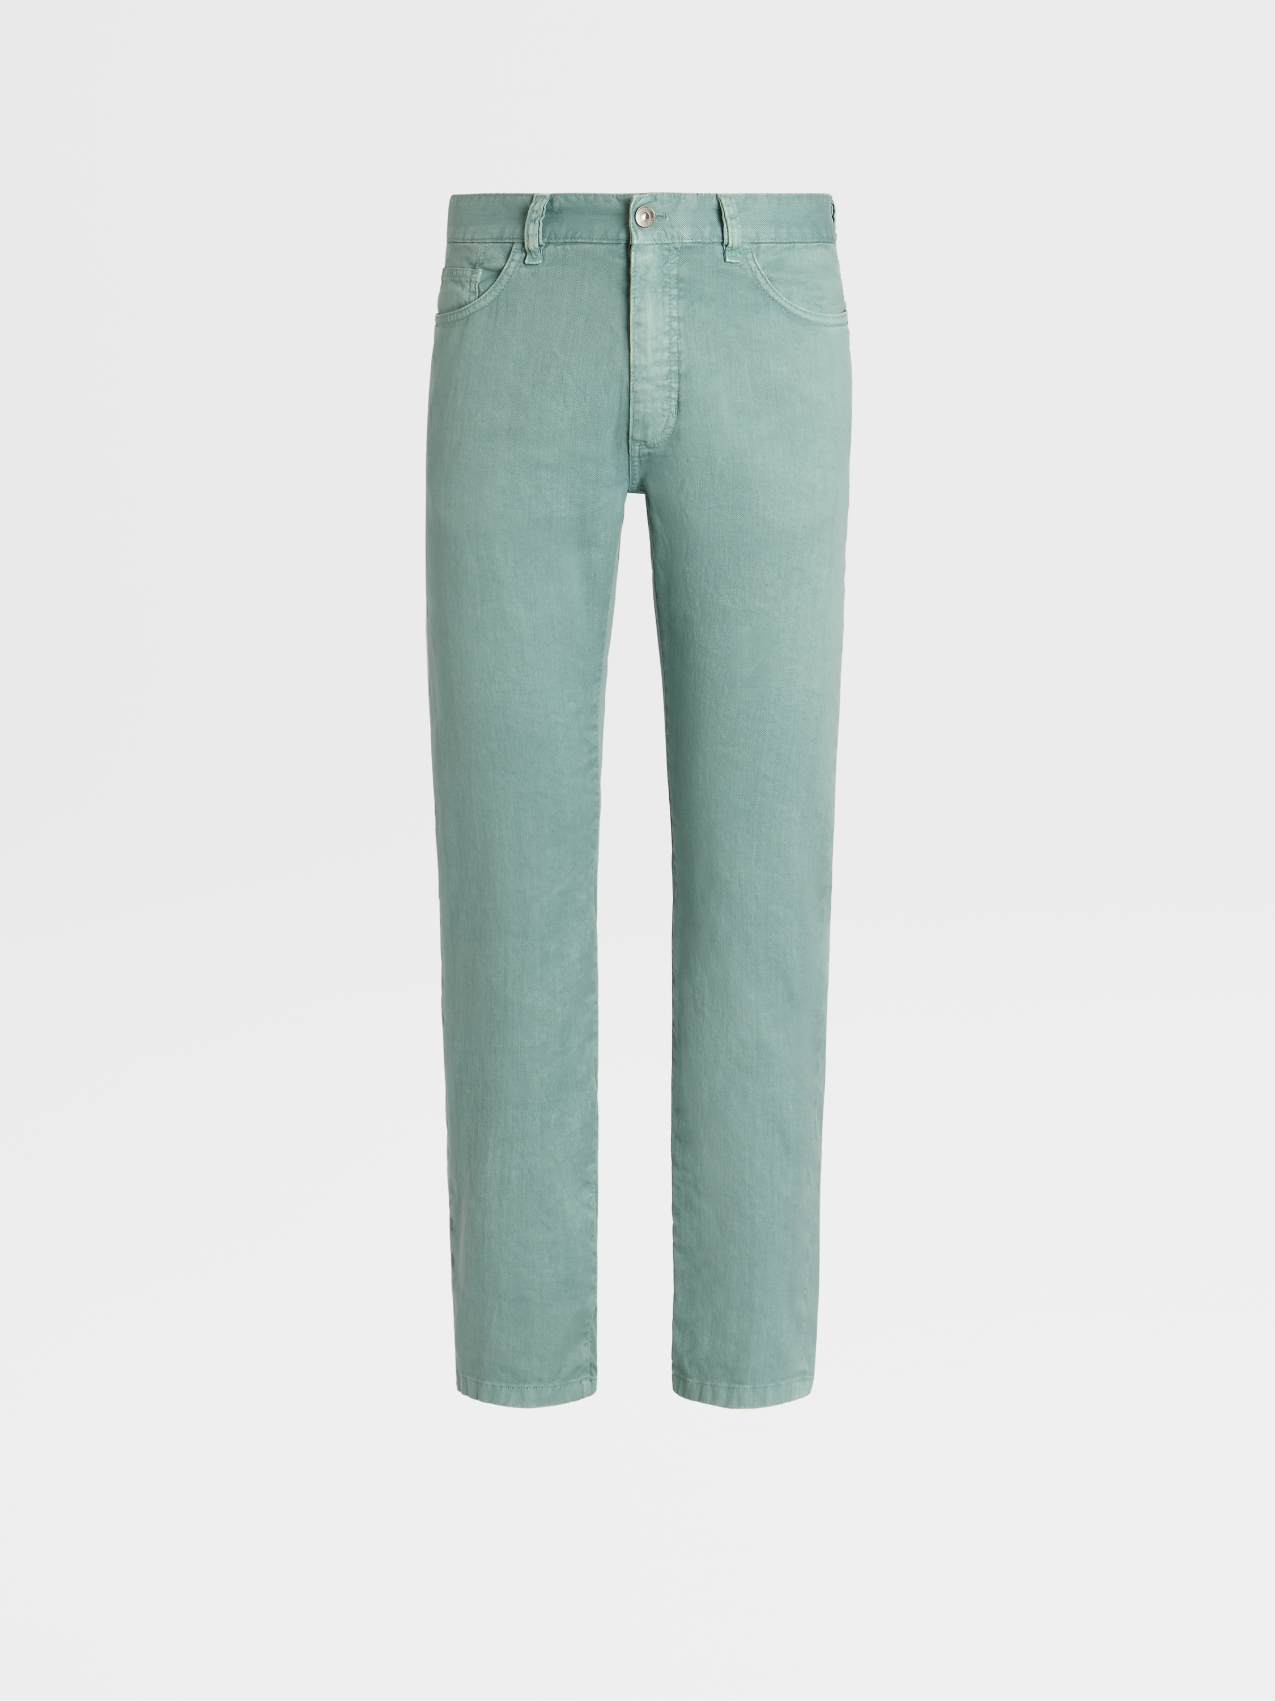 Aqua Green Garment Dyed Stretch Linen and Cotton 5-Pocket Jeans